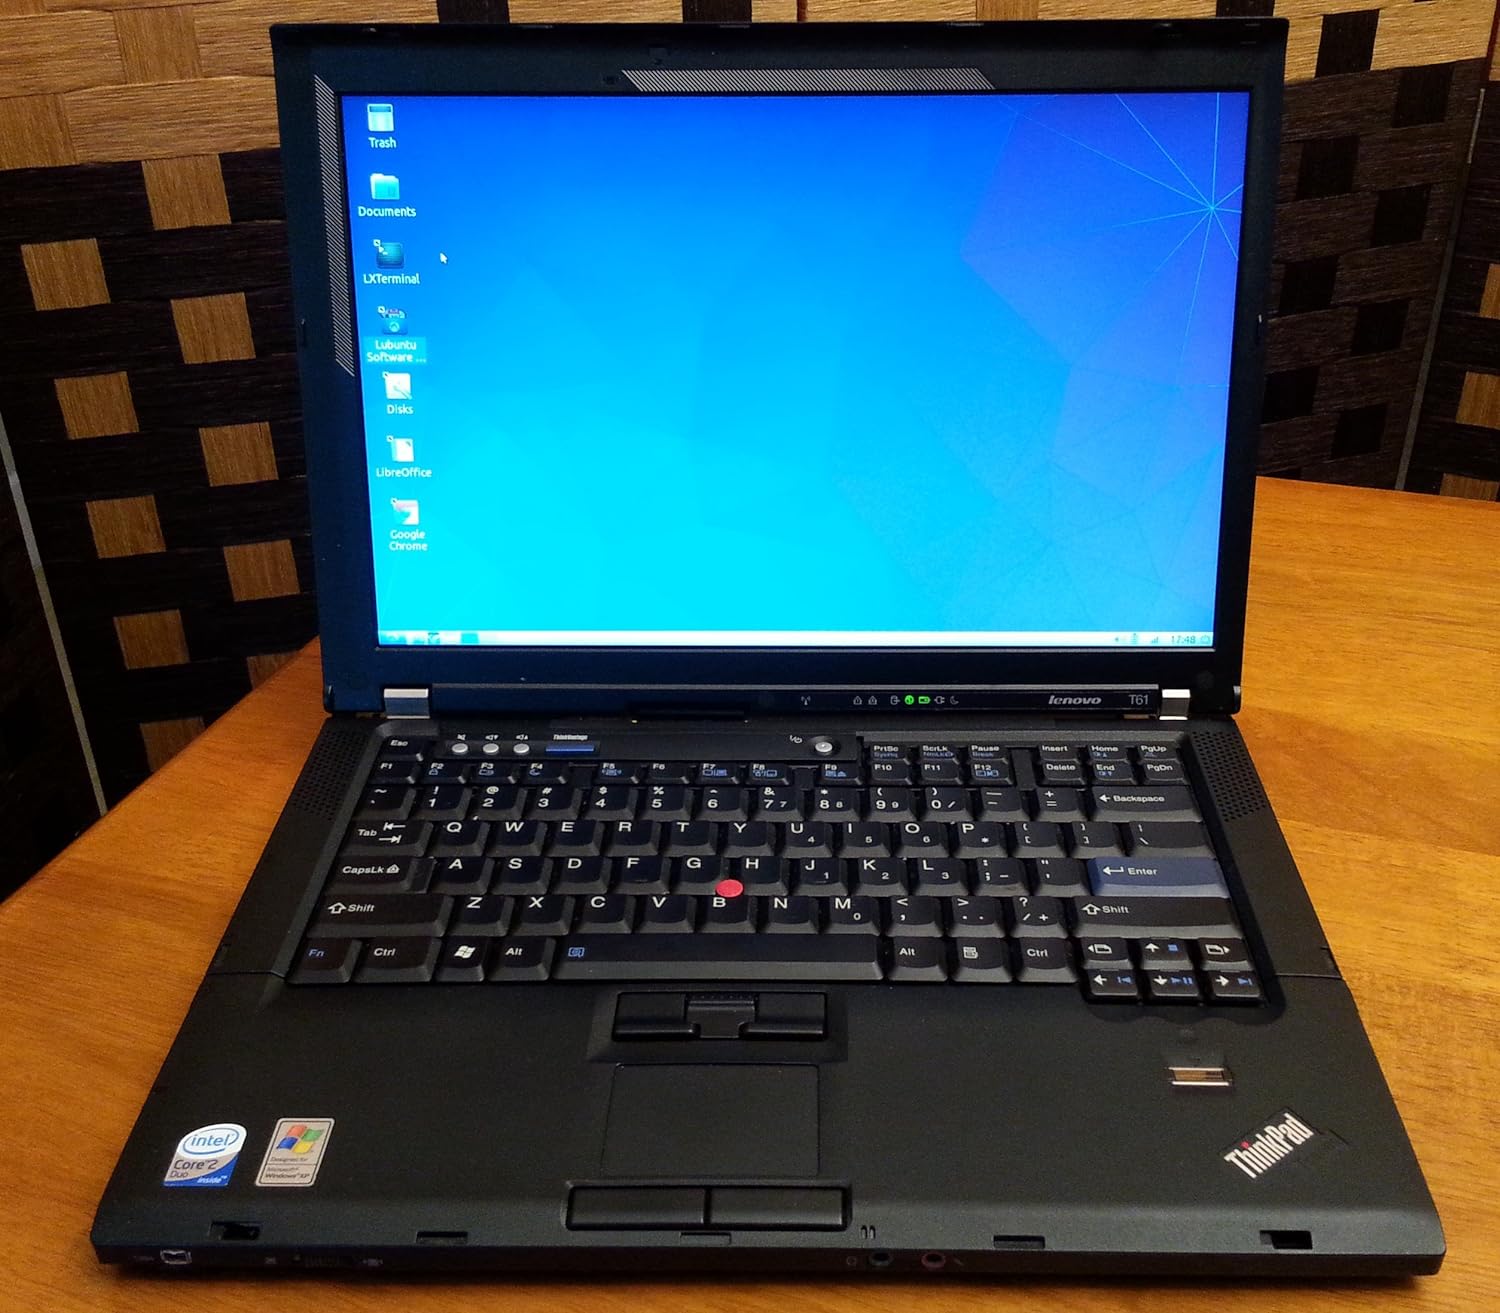 Lenovo T61 laptop with unplugged power cable